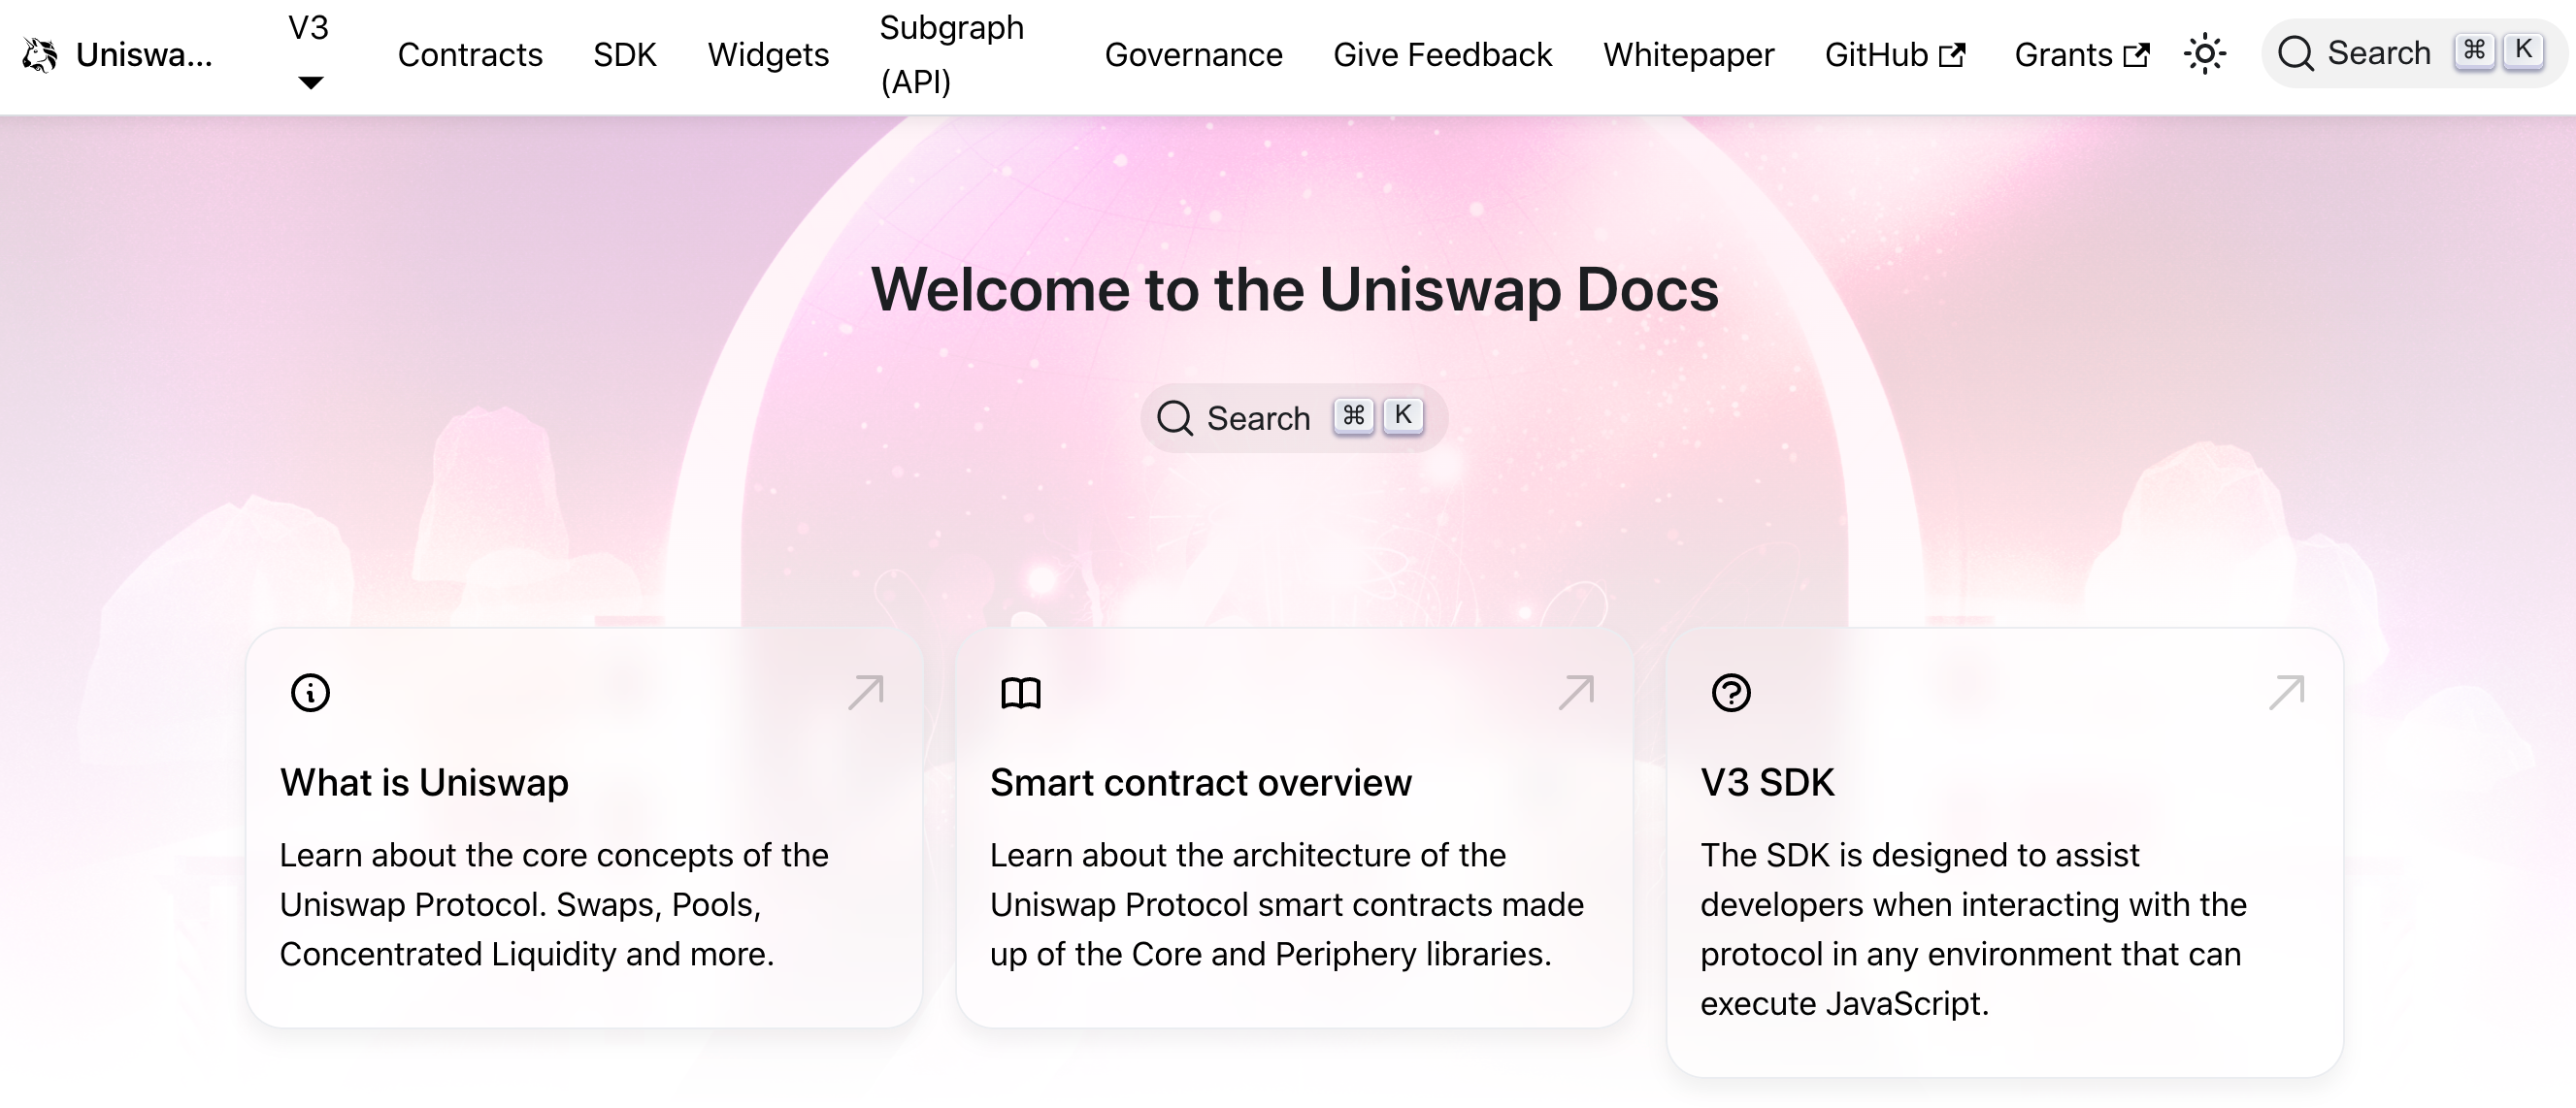 Uniswap's docs are among the most robust, intending to help developers quickly onboard and build atop the Uniswap ecosystem (via: https://docs.uniswap.org/)